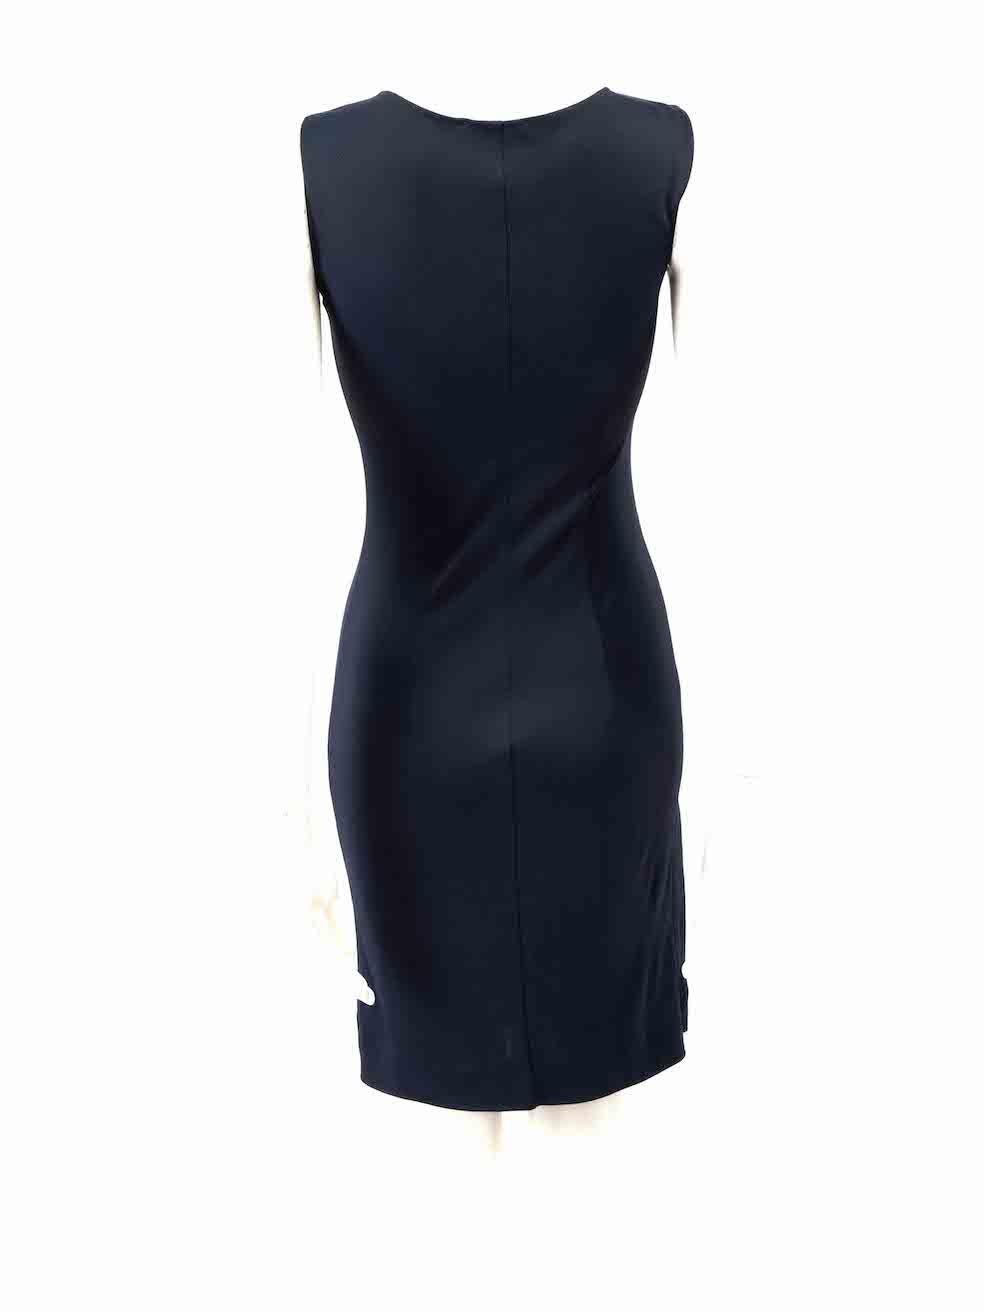 Alberta Ferretti Navy Knee Length Dress Size XS In Excellent Condition For Sale In London, GB